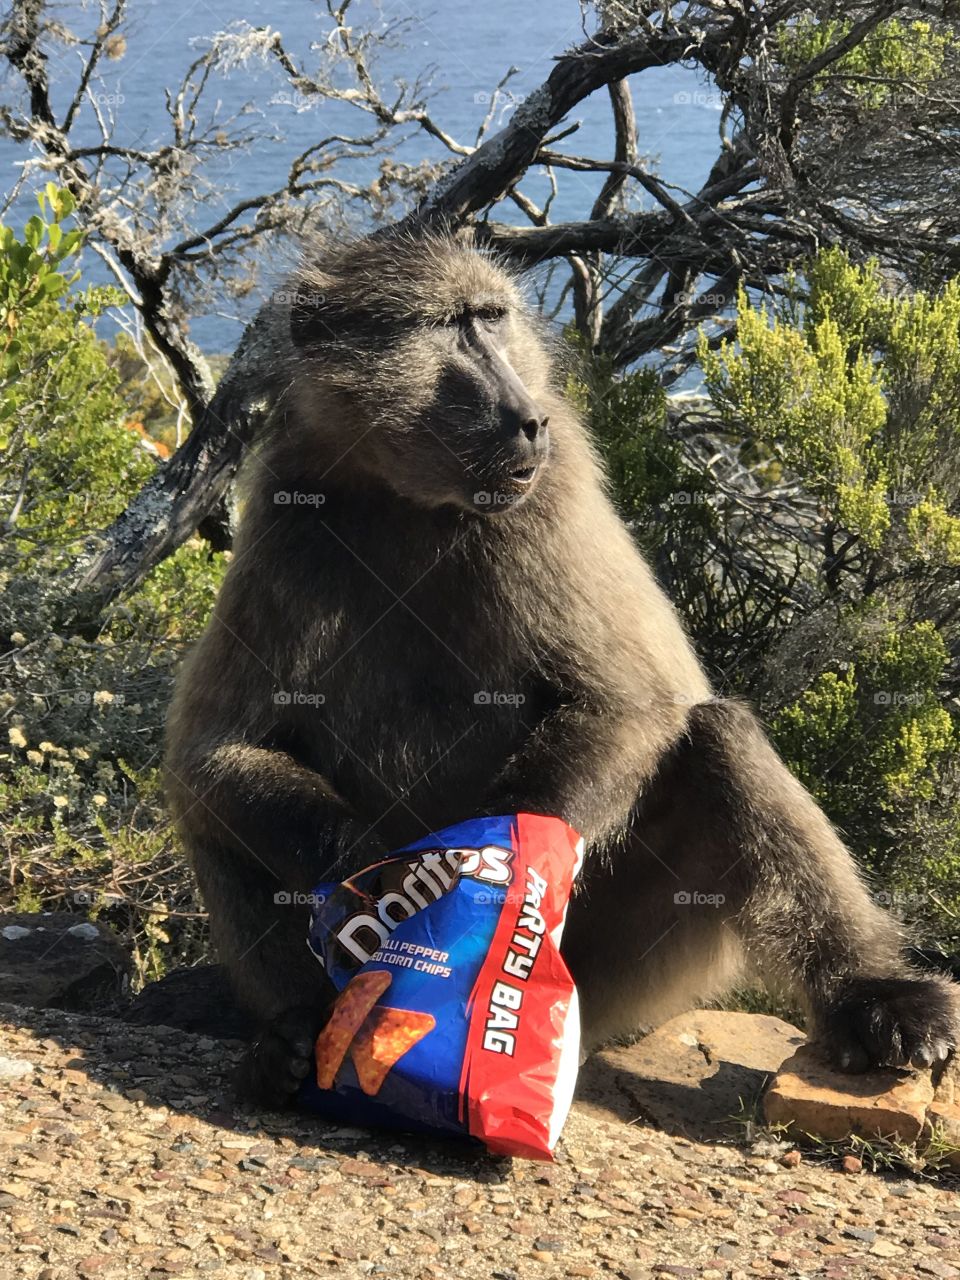 Baboon in Cape Town South Africa enjoying Doritos snatched from a tourist 